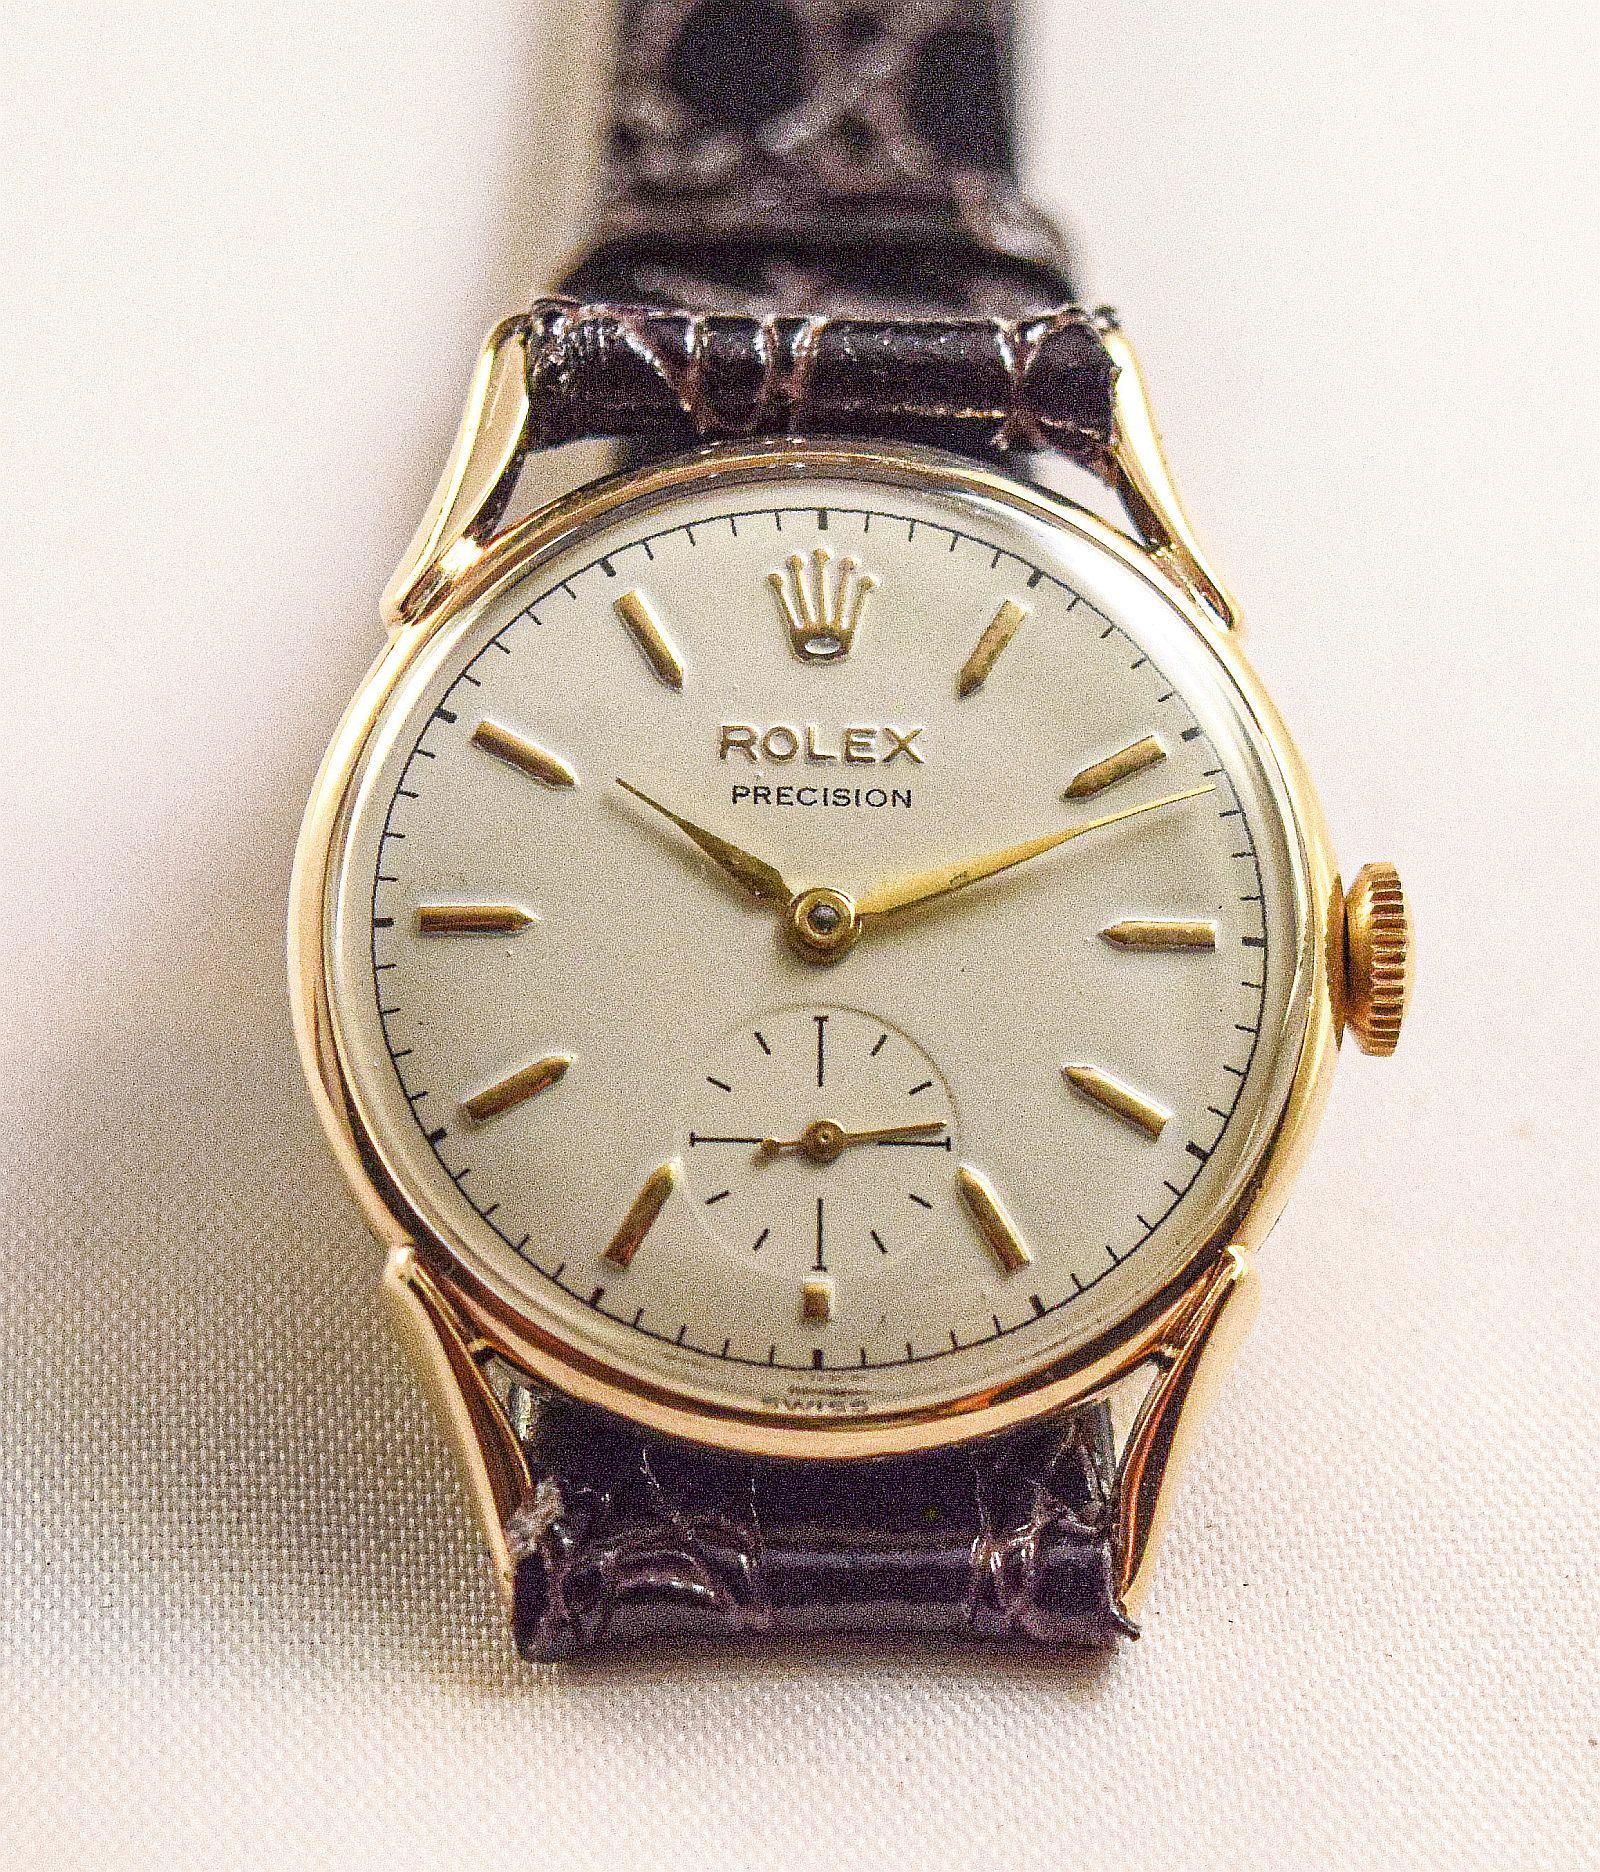 Rolex extremely rare solid gold watch with unusual lugs 3